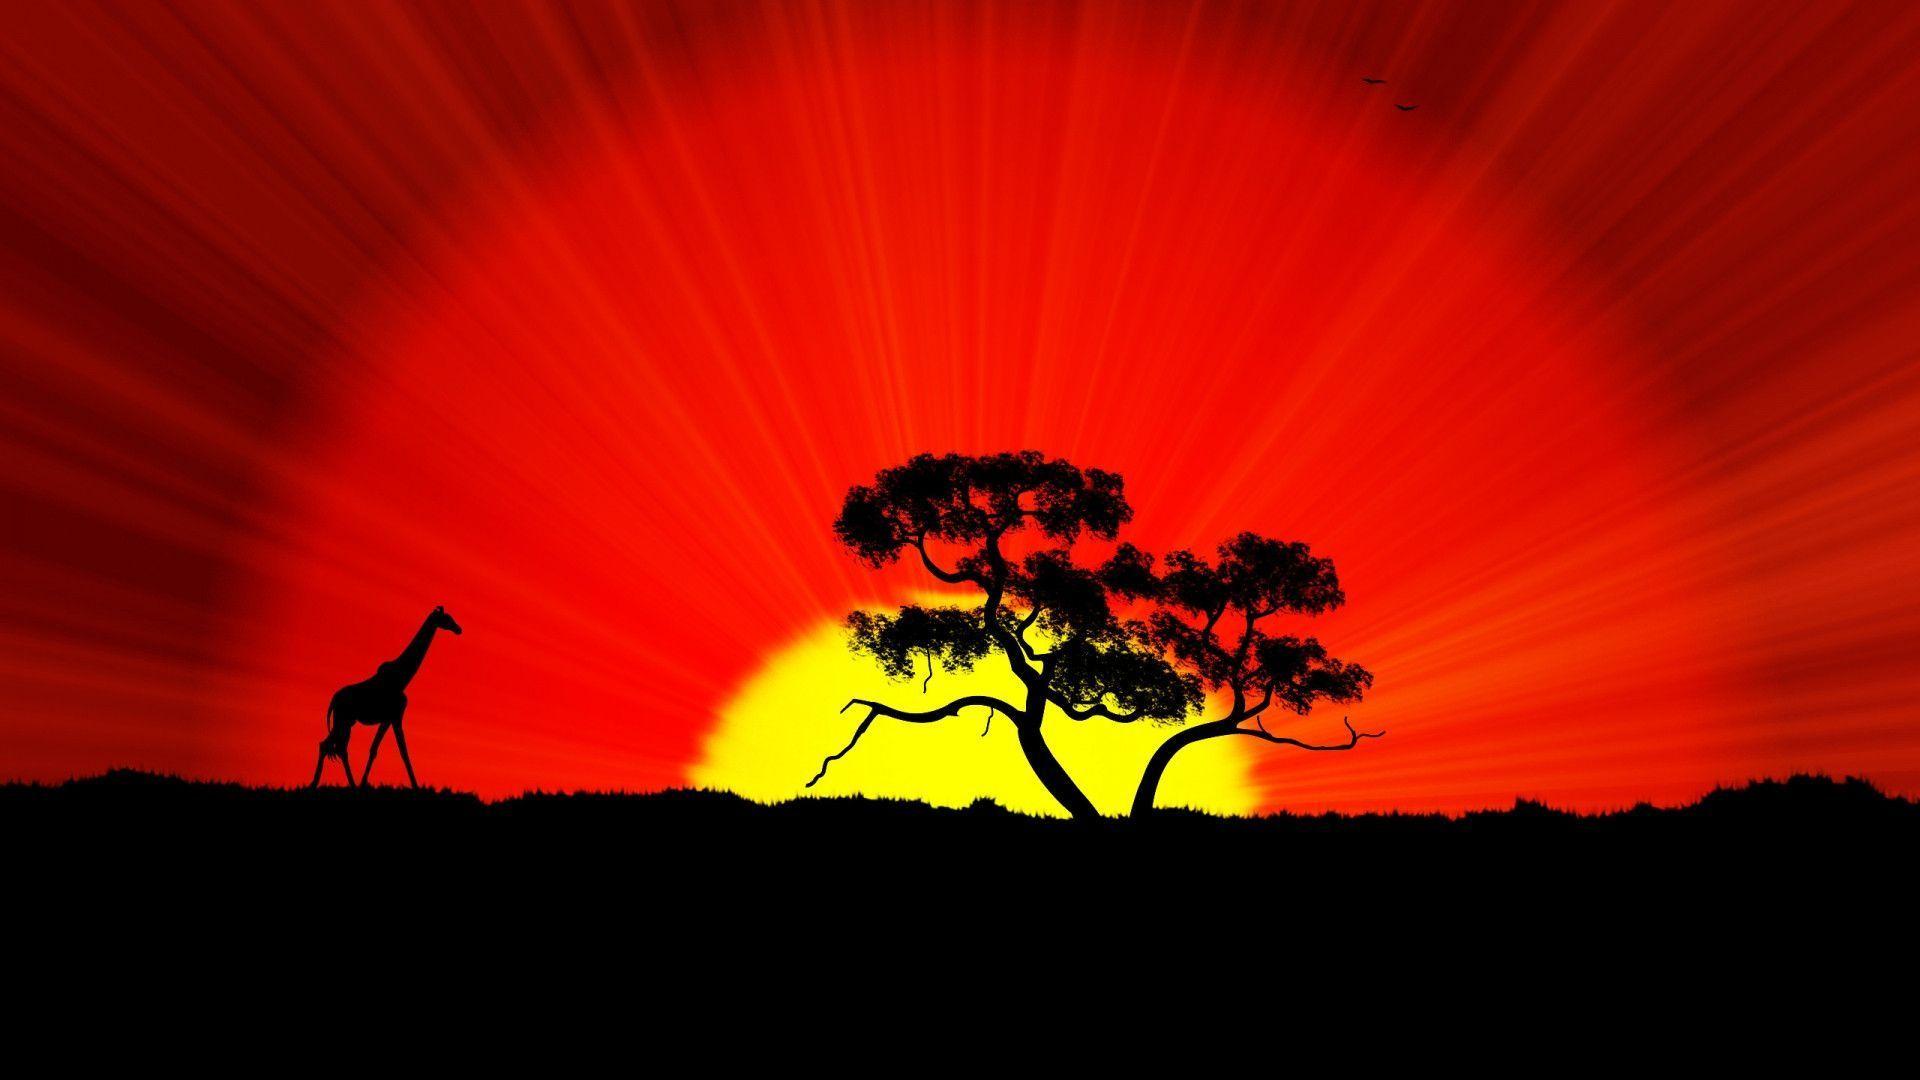 World sky waterscapes africa wallpaper south wallpaper 1920x1200